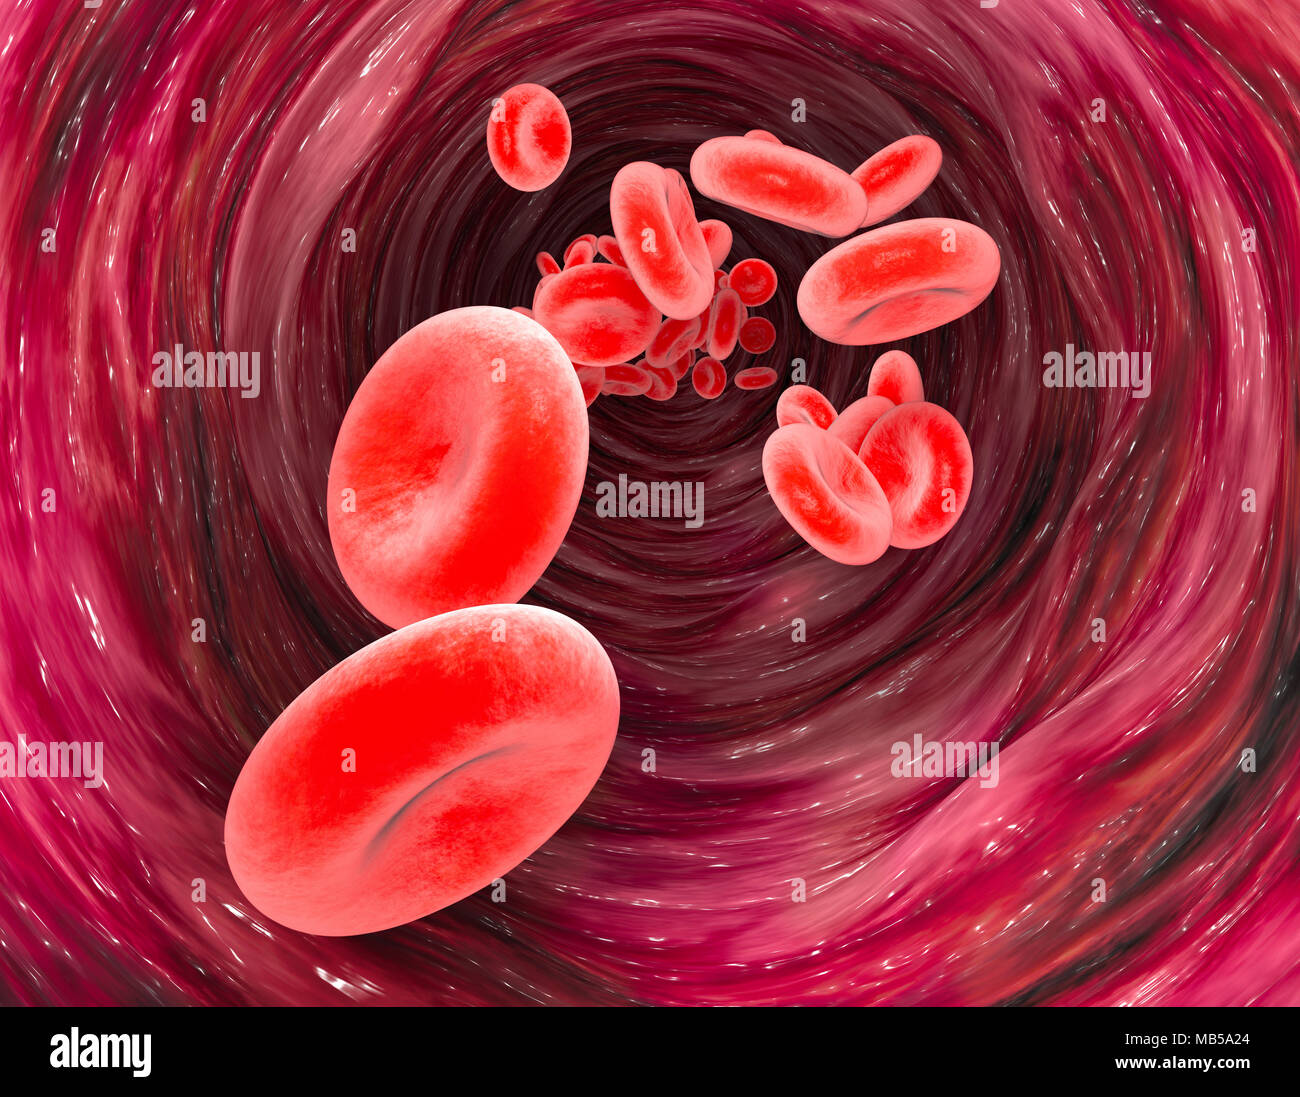 Red blood cells and blood flow through a vein, small spherical cells that contain hemoglobin, a protein that gives a color to the blood Stock Photo